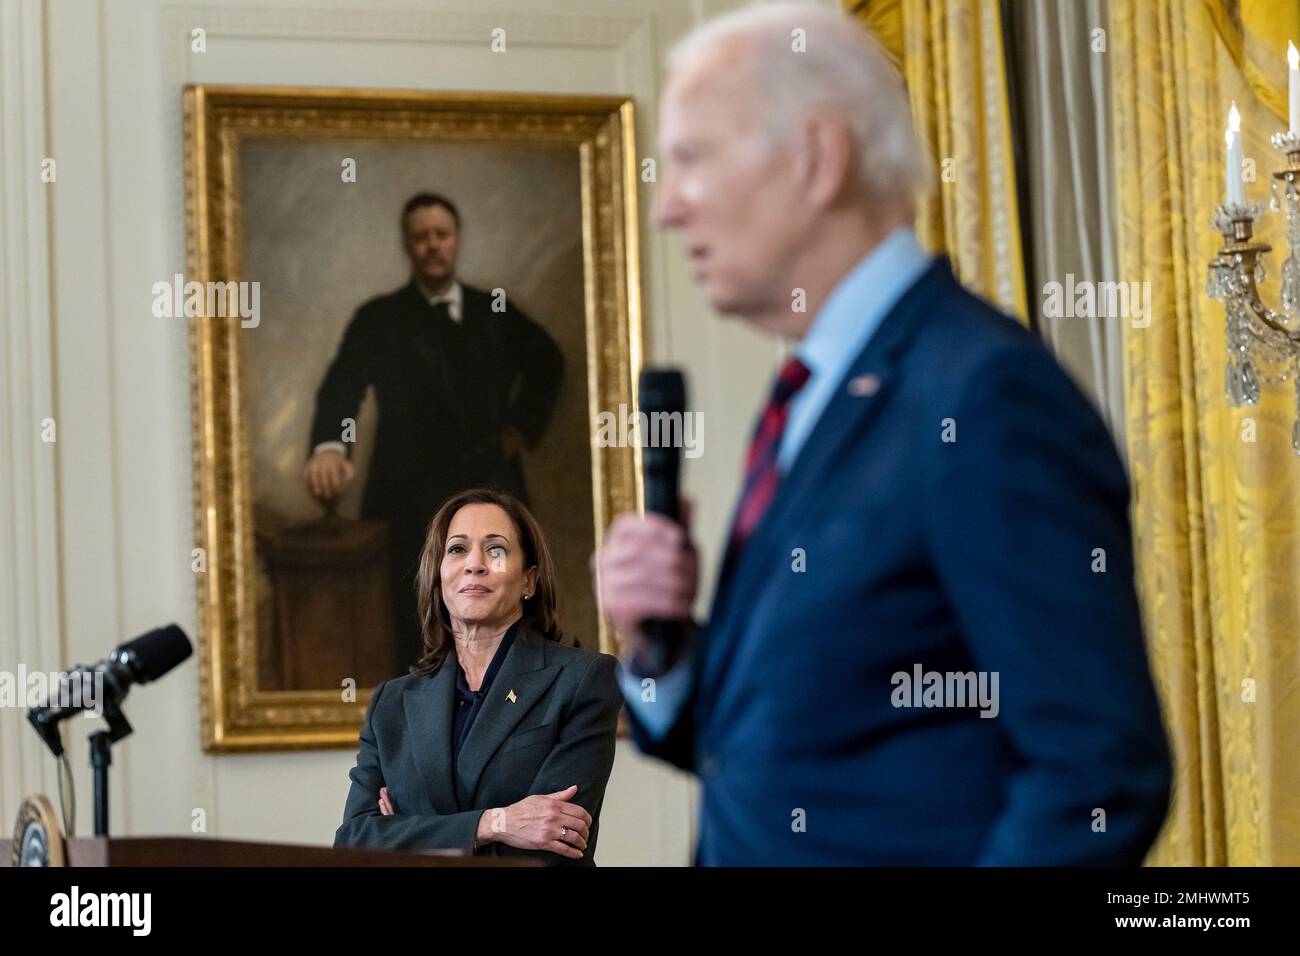 Washington, United States of America. 24 January, 2023. U.S President Joe Biden delivers remarks as Vice President Kamala Harris, left, looks on during a reception welcoming new members of the 118th Congress in the East Room of the White House, January 24, 2023 in Washington, D.C.  Credit: Erin Scott/White House Photo/Alamy Live News Stock Photo